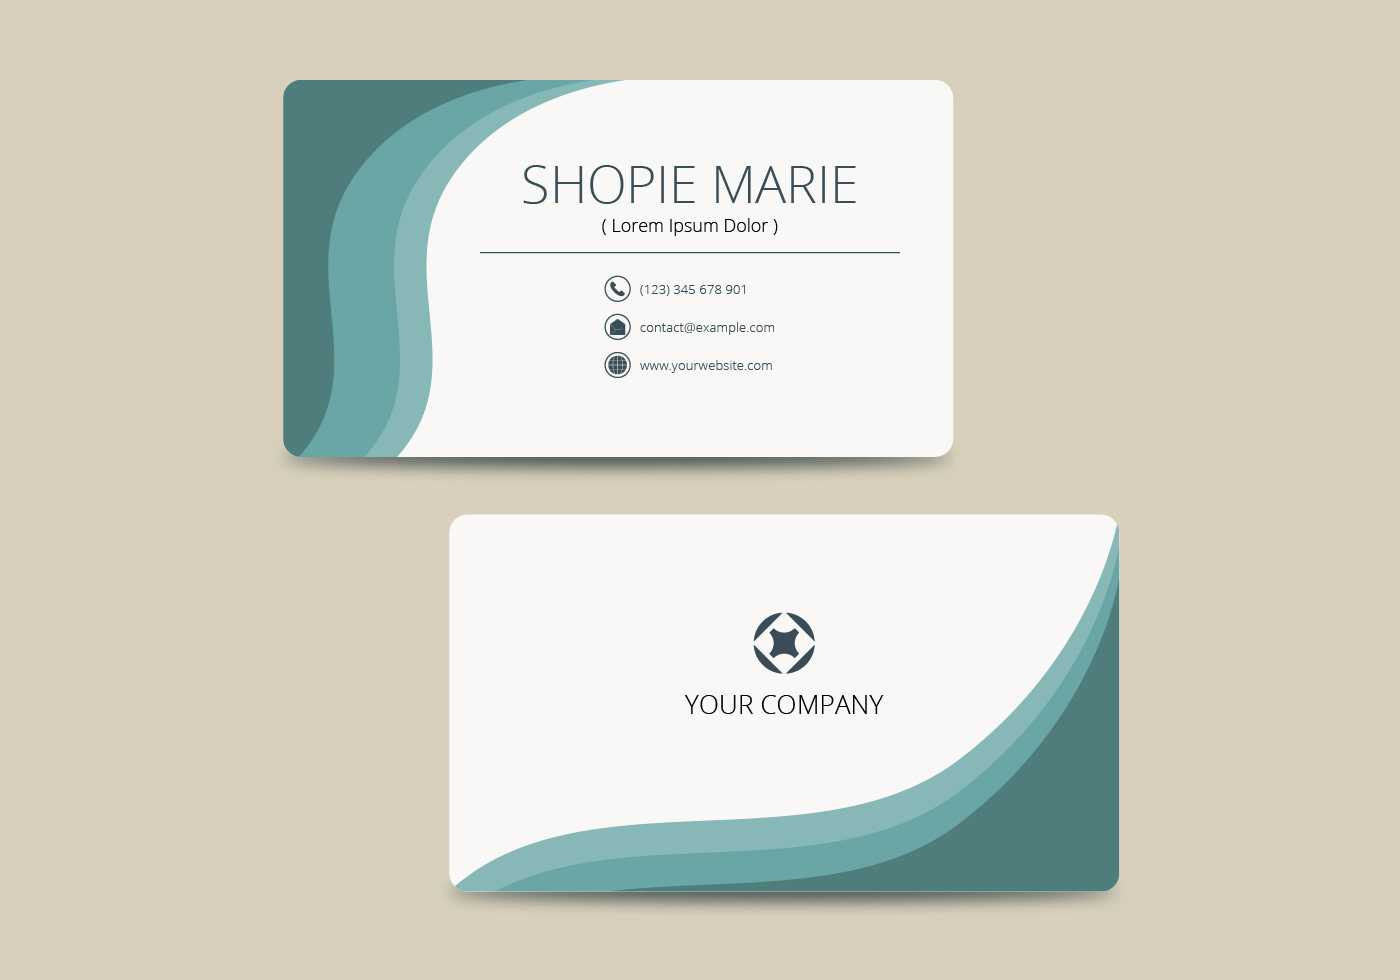 Teal Business Card Template Vector - Download Free Vectors Pertaining To Buisness Card Template